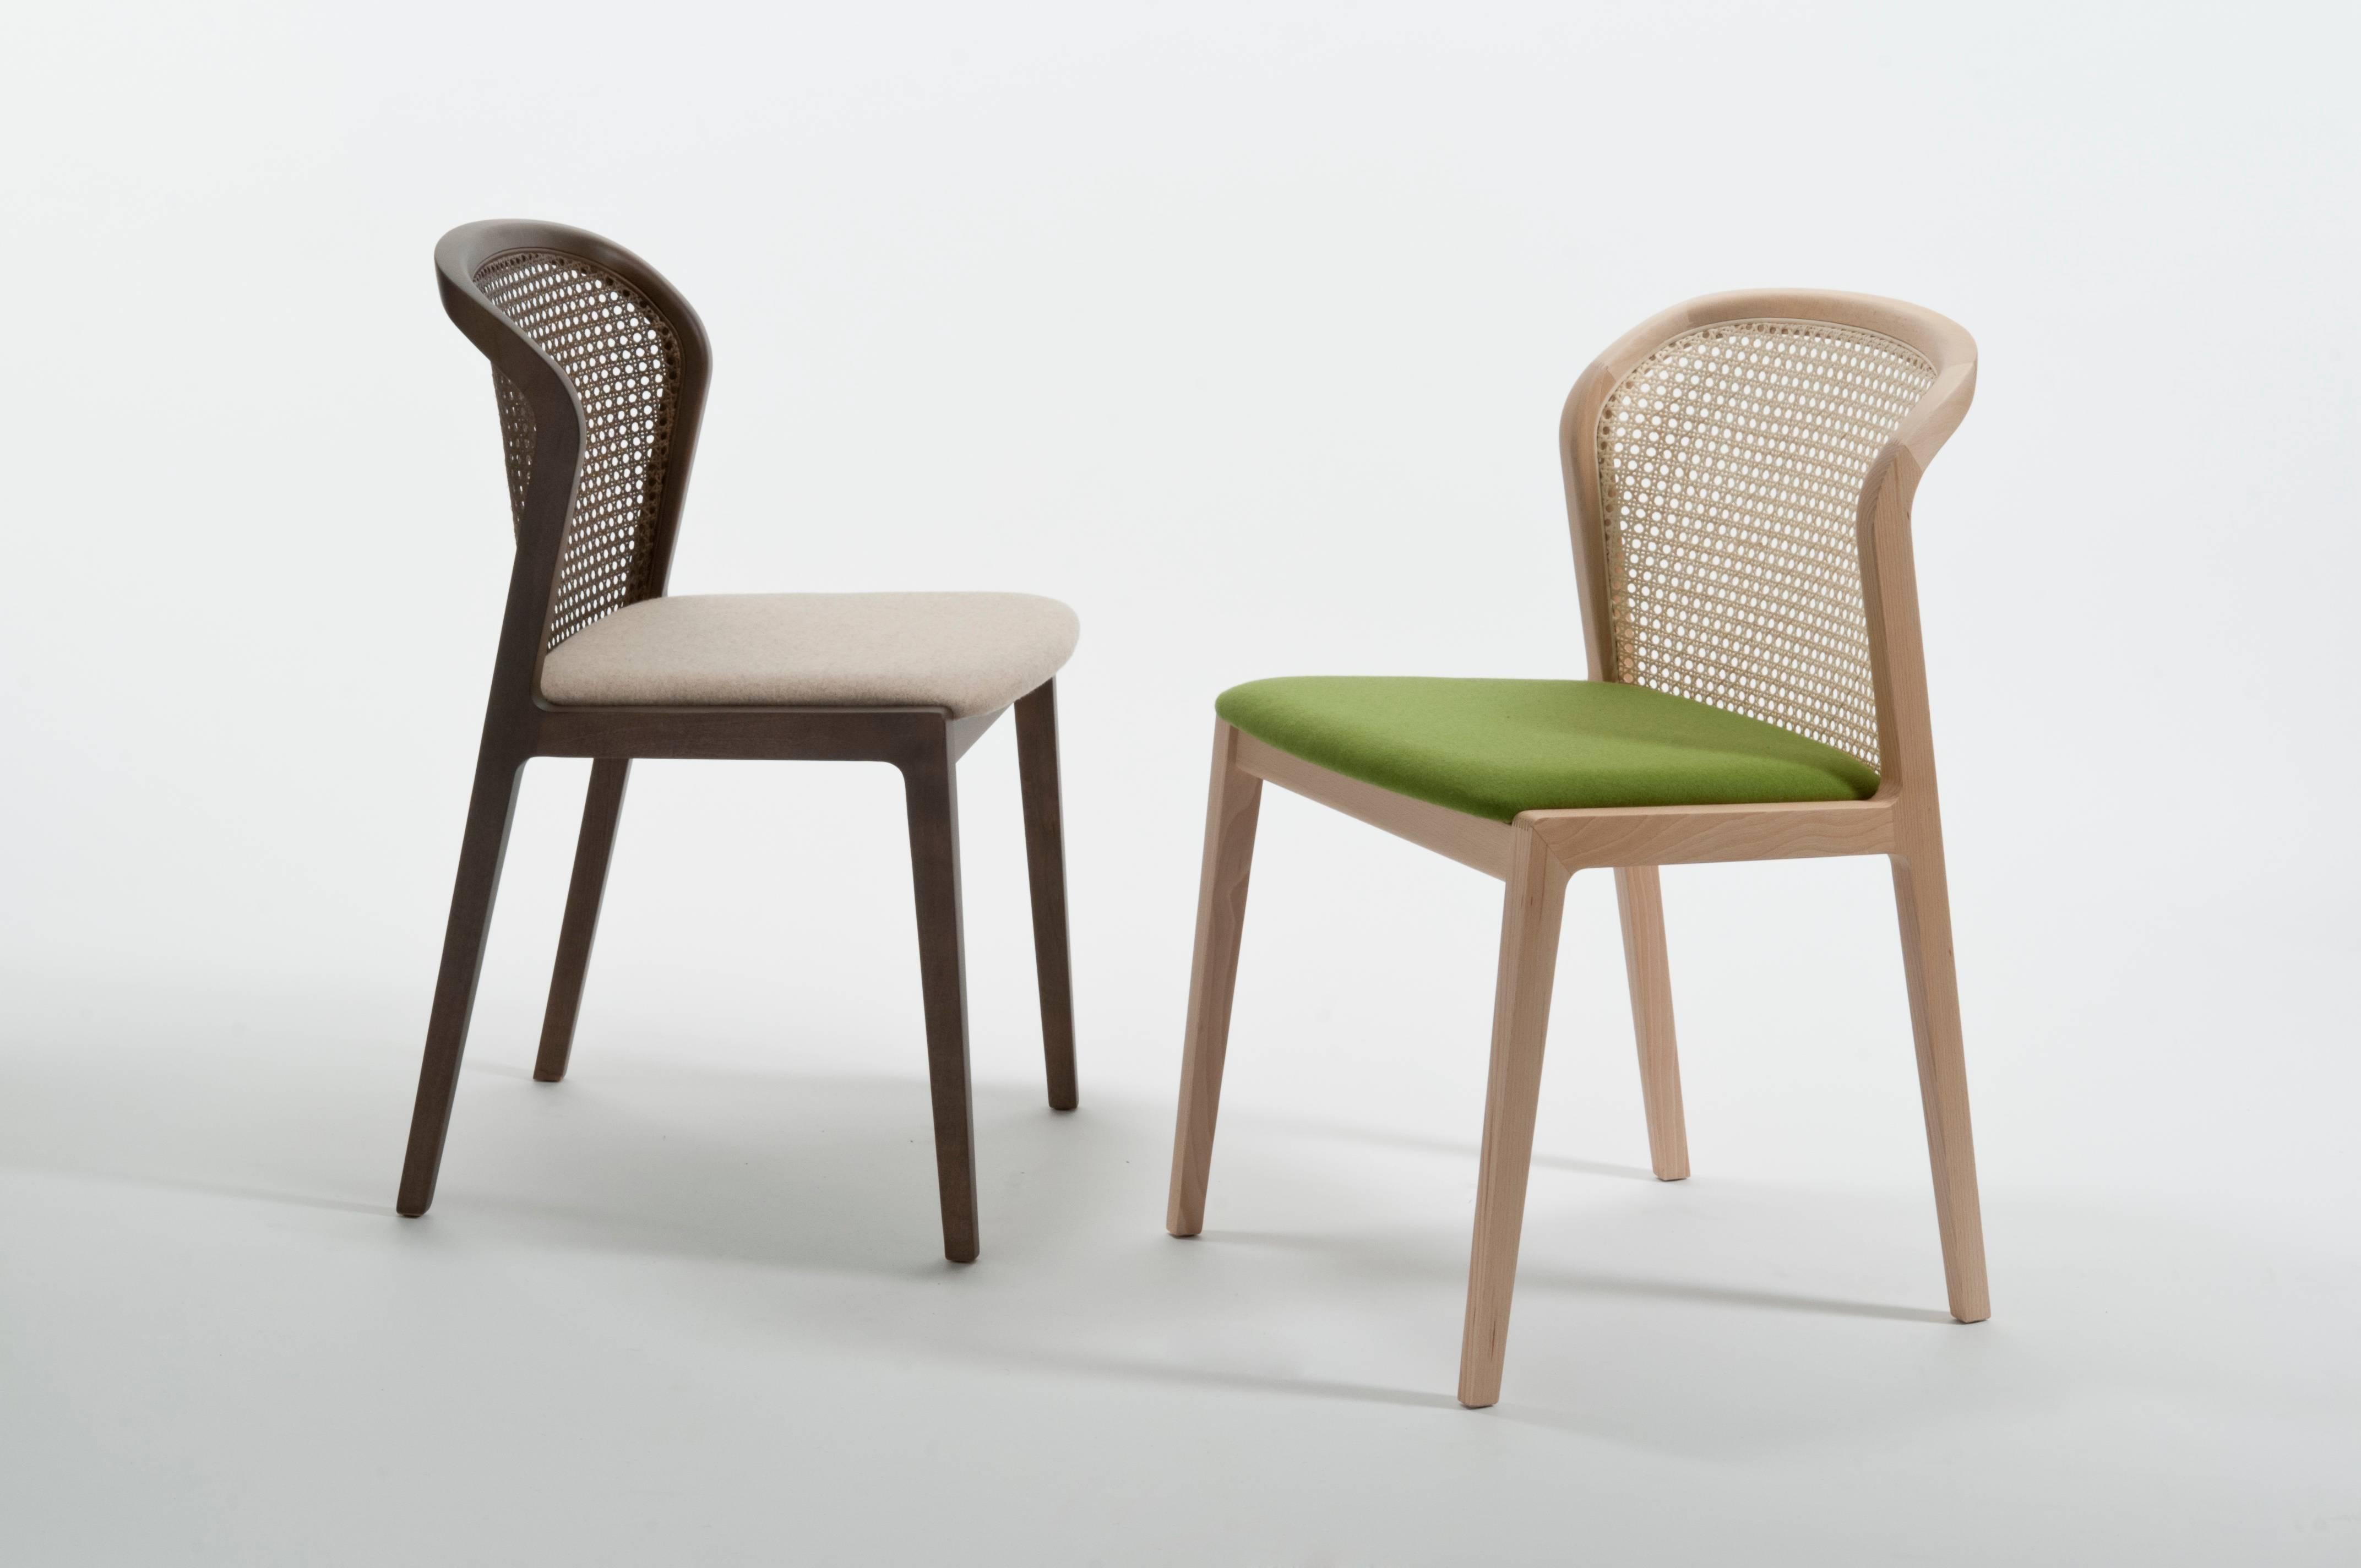 Machine-Made Vienna Chair in Walnut and Straw, Green Felt Upholstered Seat. Made in Italy For Sale